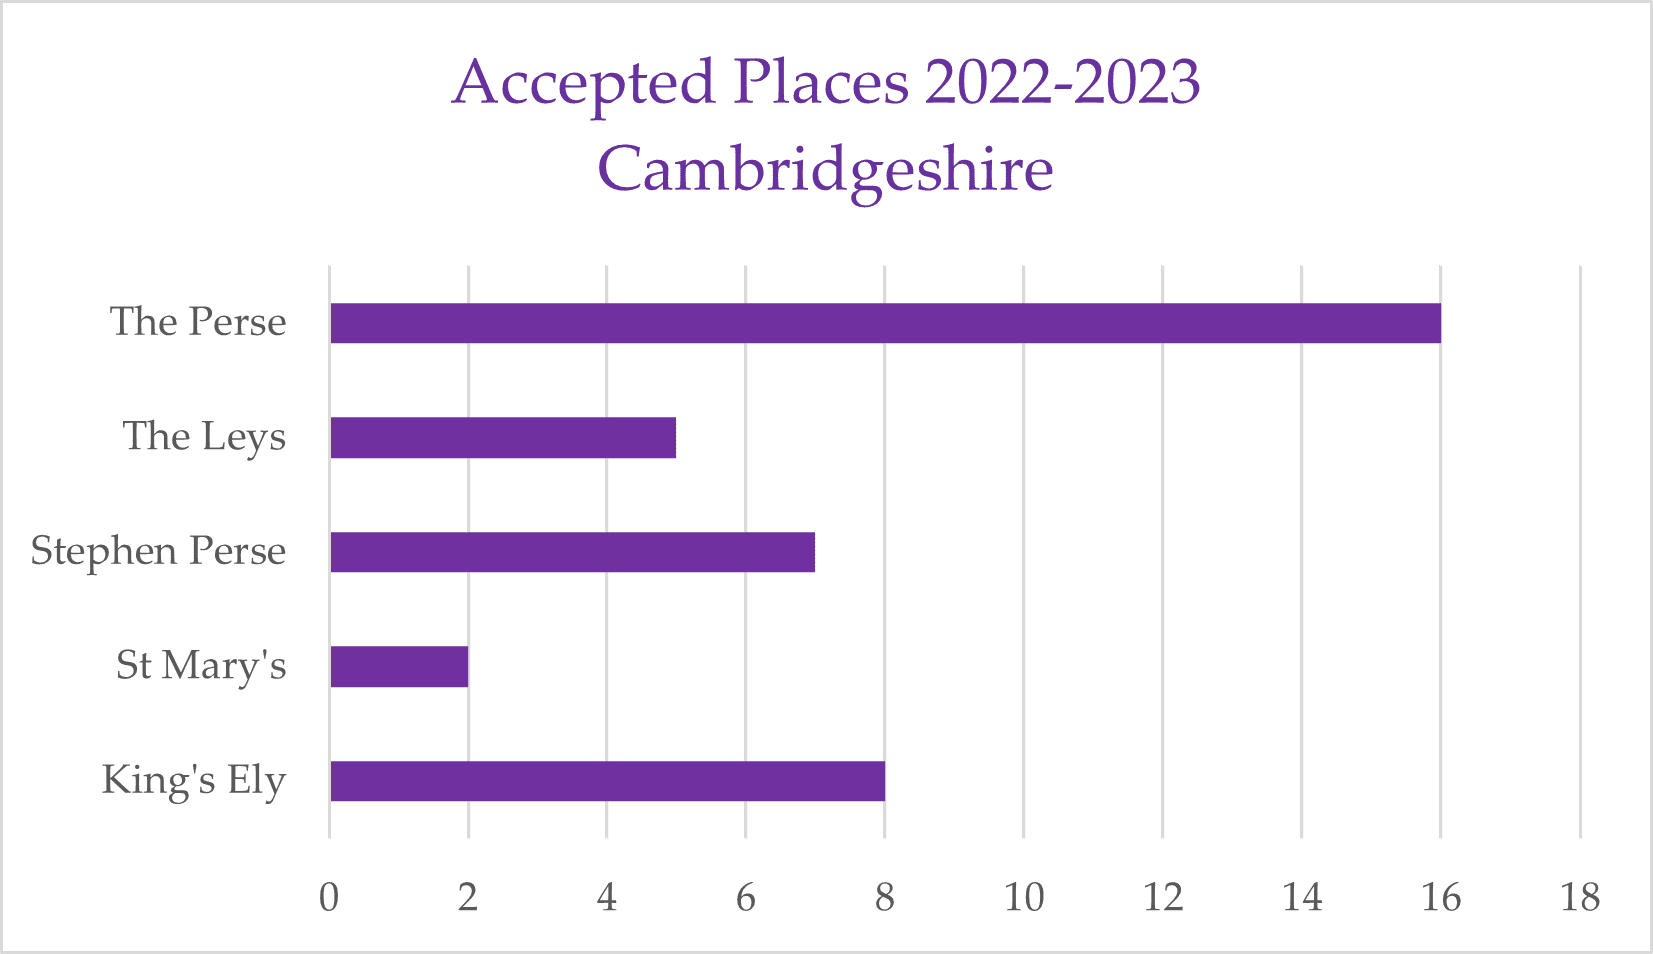 Accepted places 2022-2023 Cambridgeshire